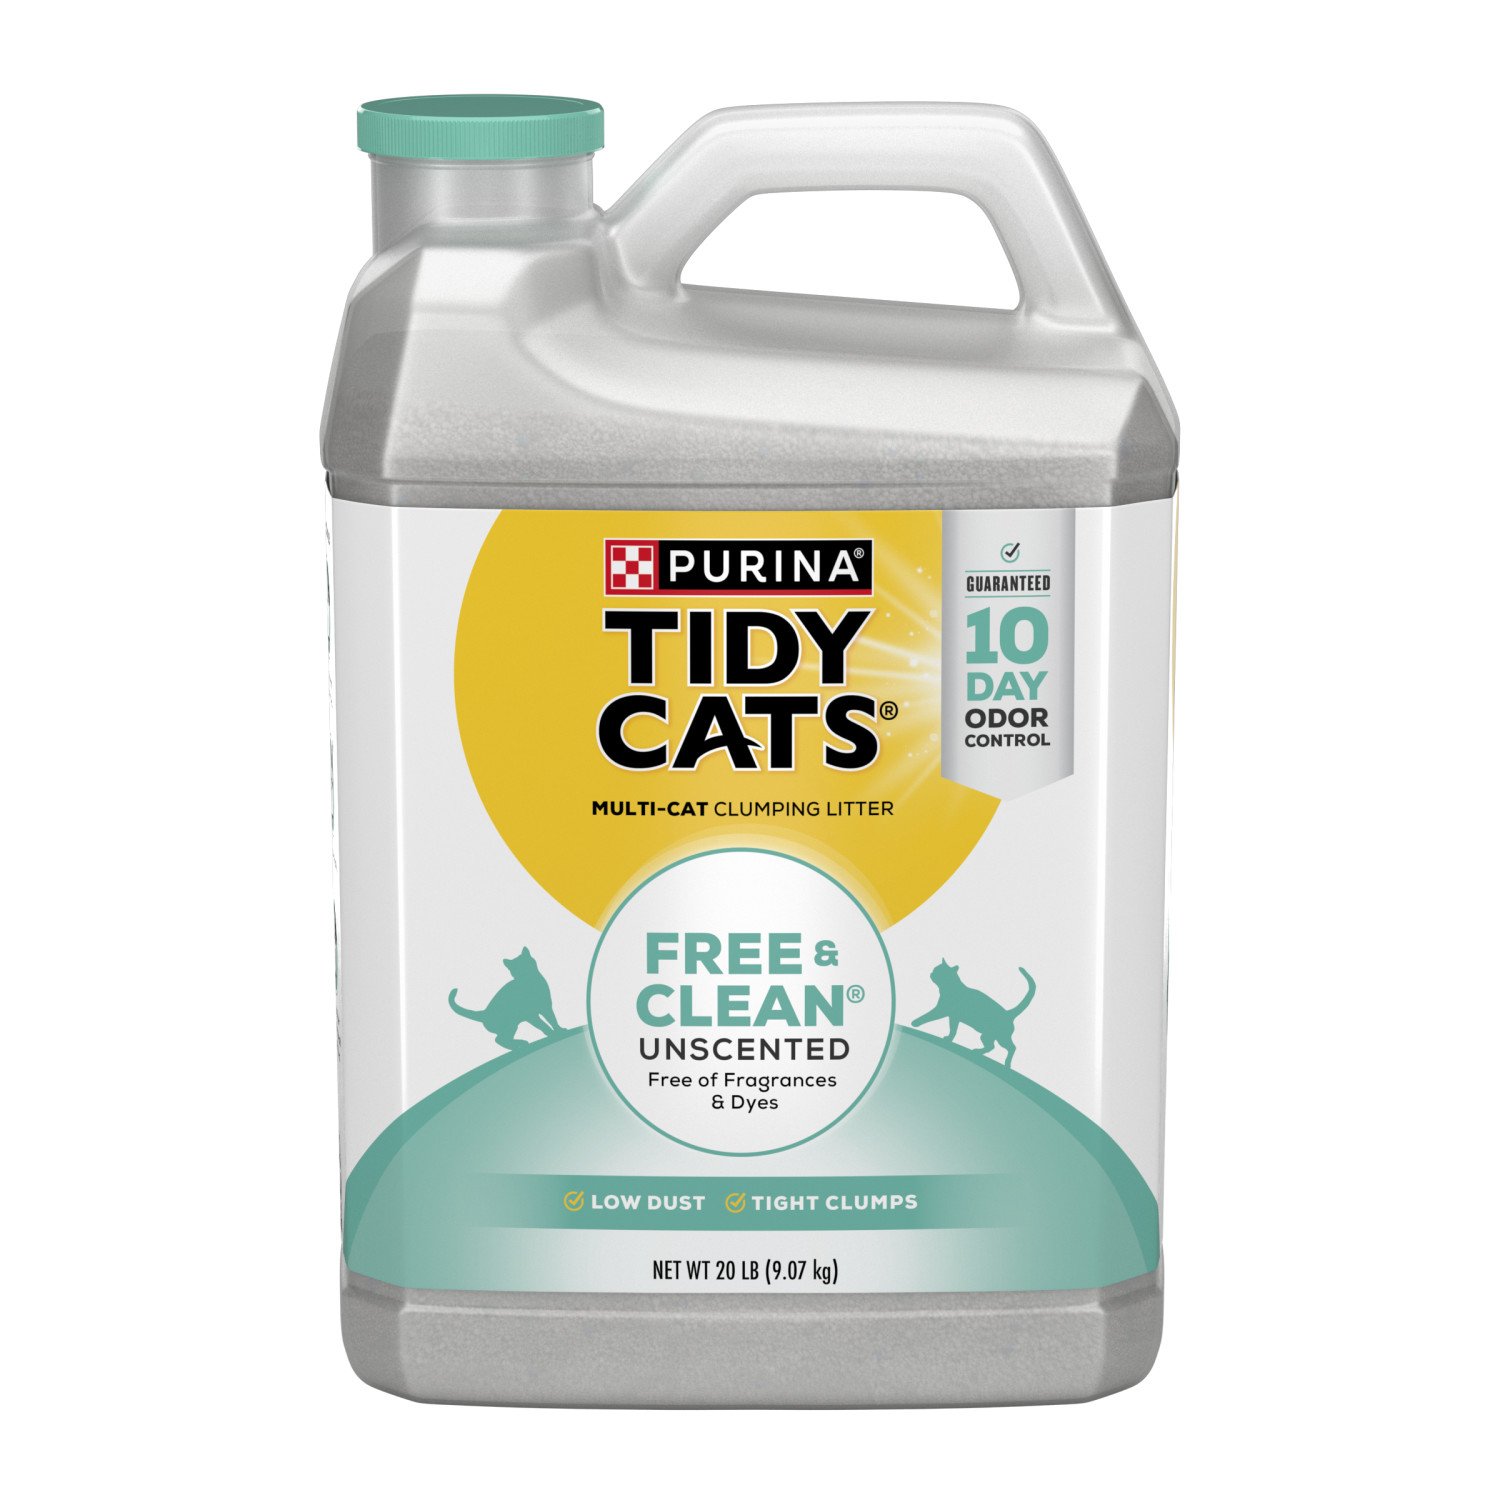 Purina Tidy Cats Fresh & Clean Unscented Clumping Litter Shop Cats at